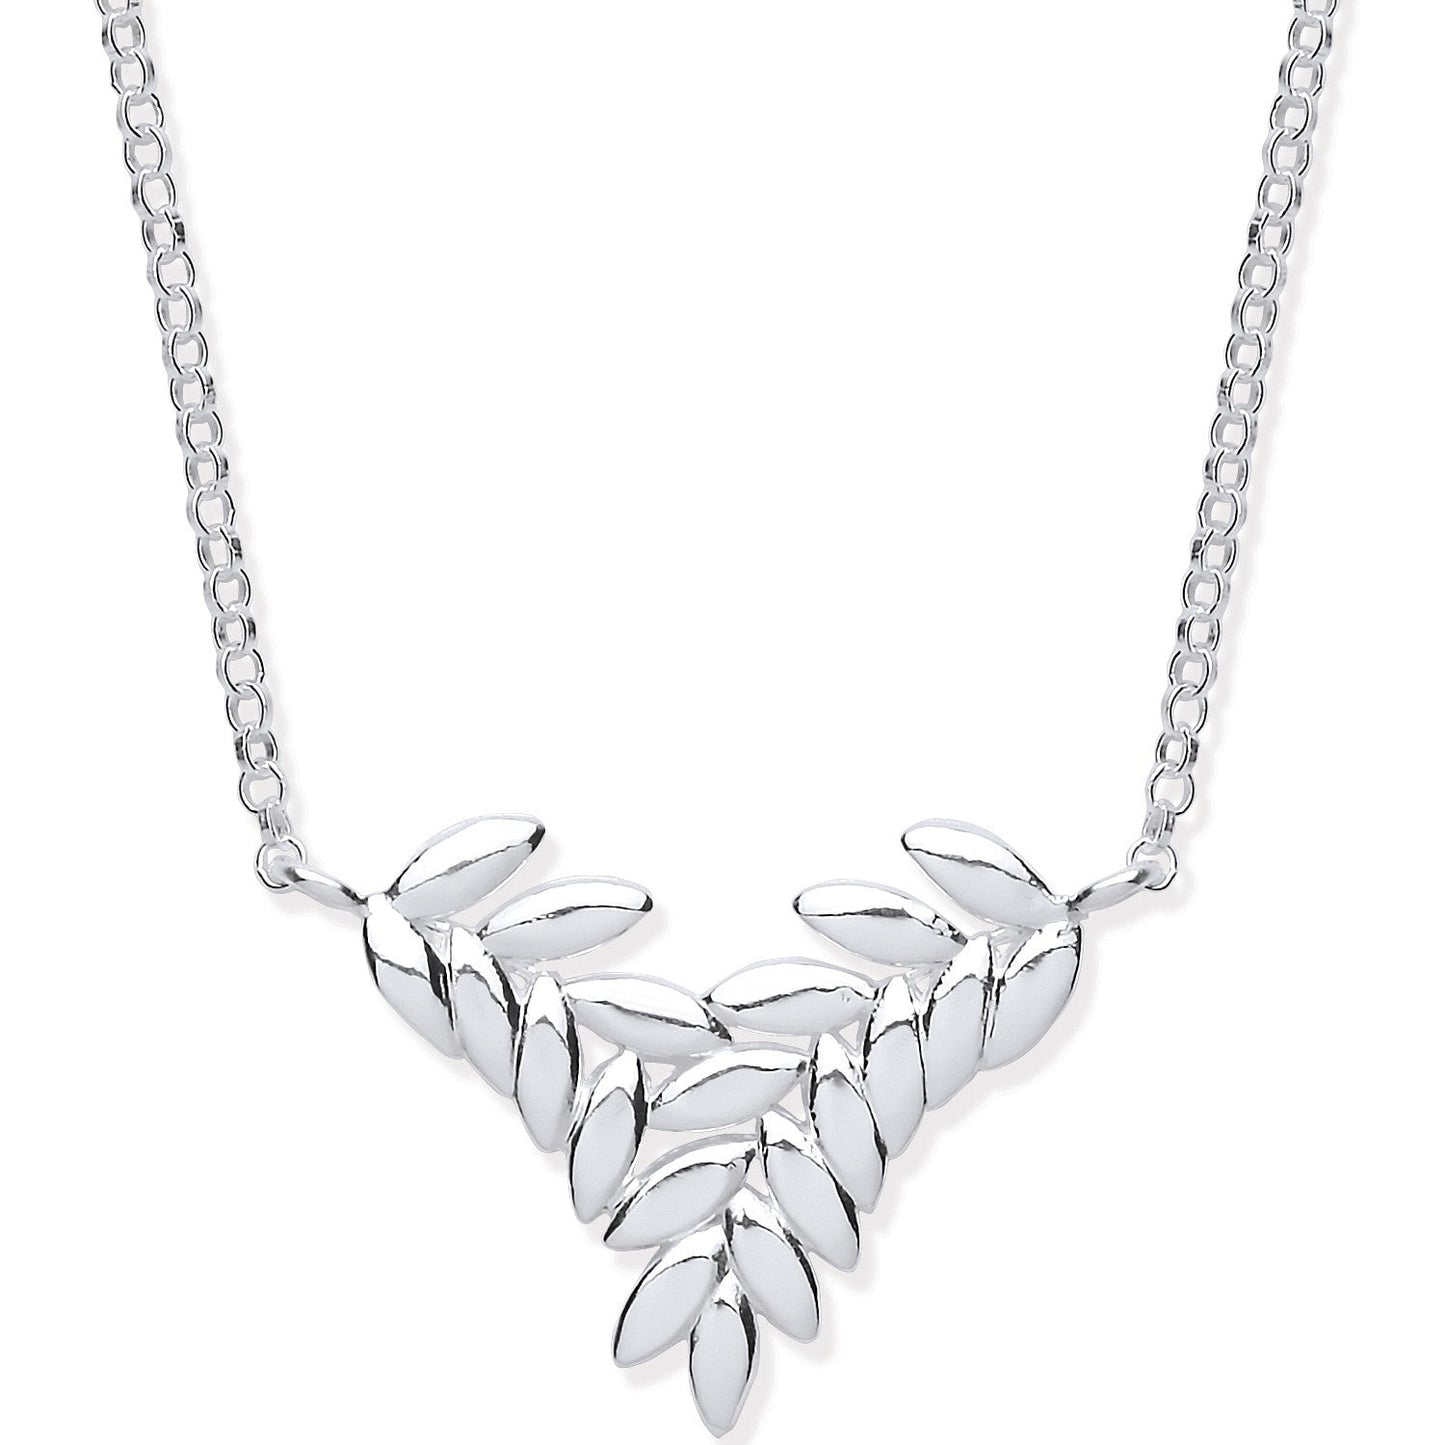 925 Sterling Silver Barley Leaf Necklace 16" + 2" extension - FJewellery